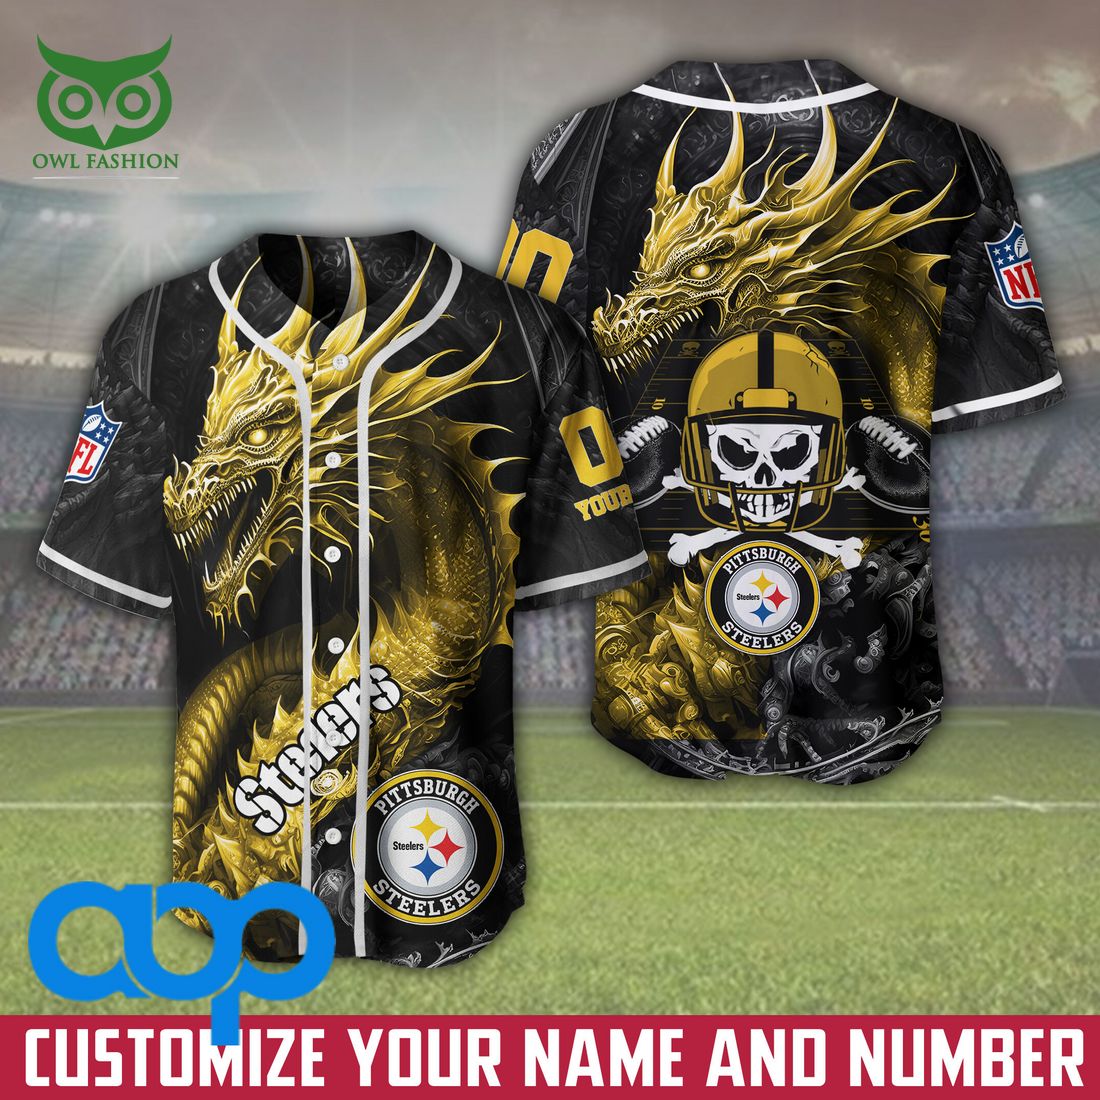 personalized steelers jersey